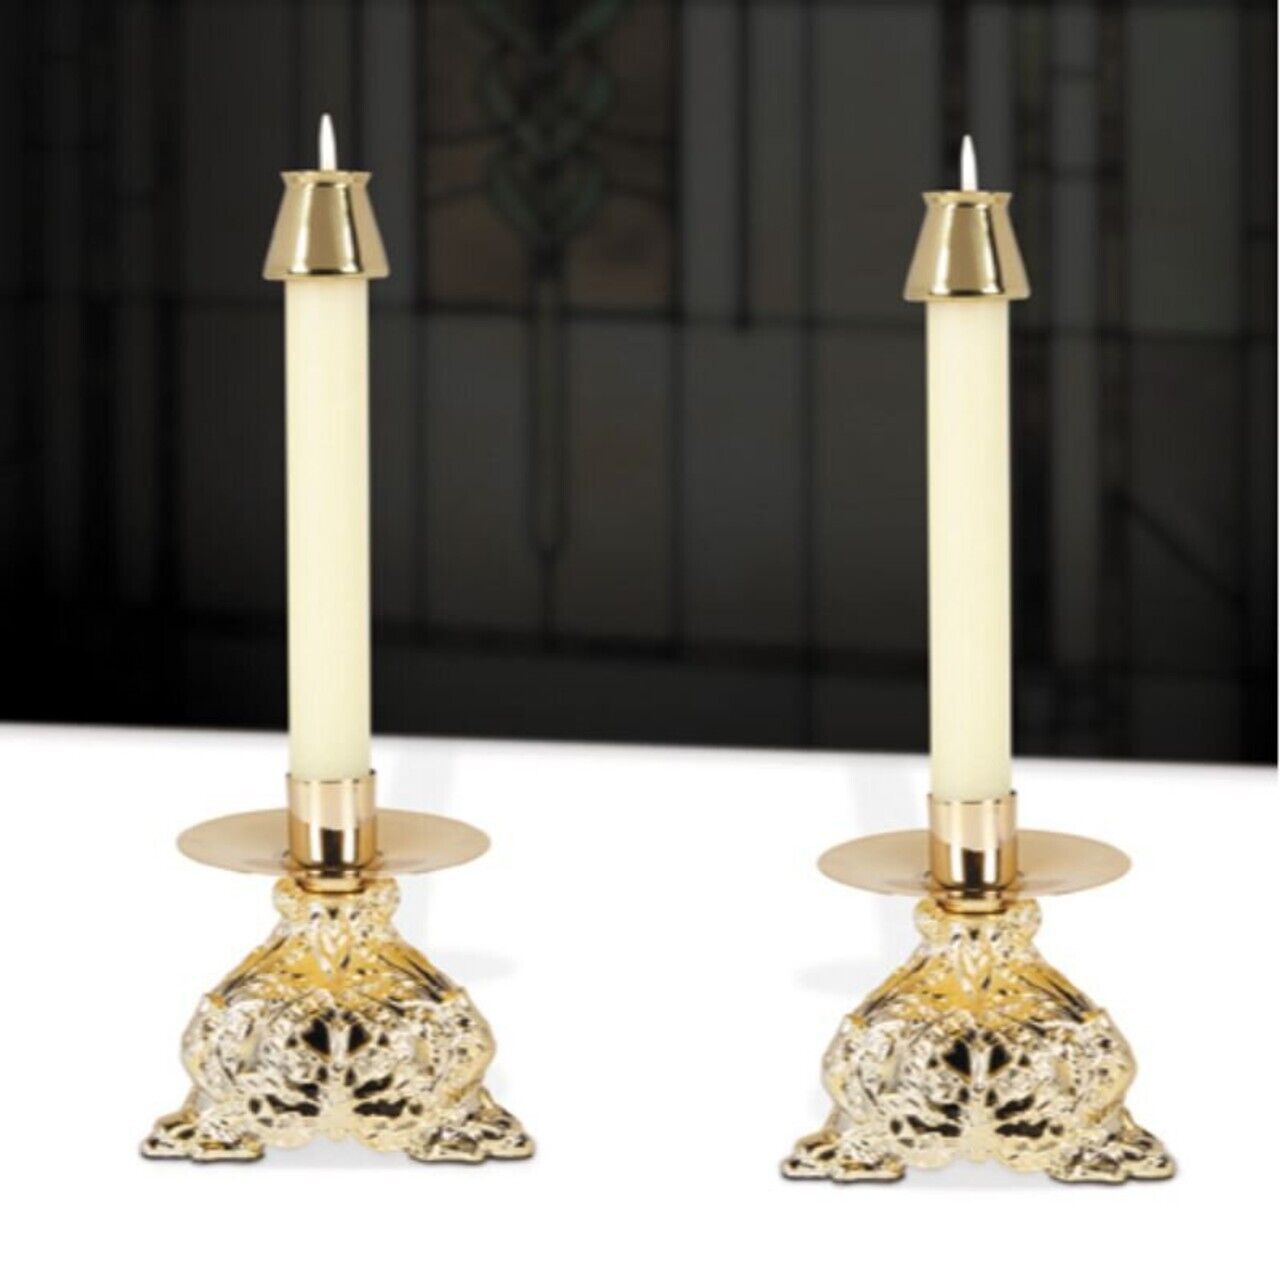 Set of 2 Ornamented Resin Altar Candlesticks Church or Sanctuary Use 6 1/2 In